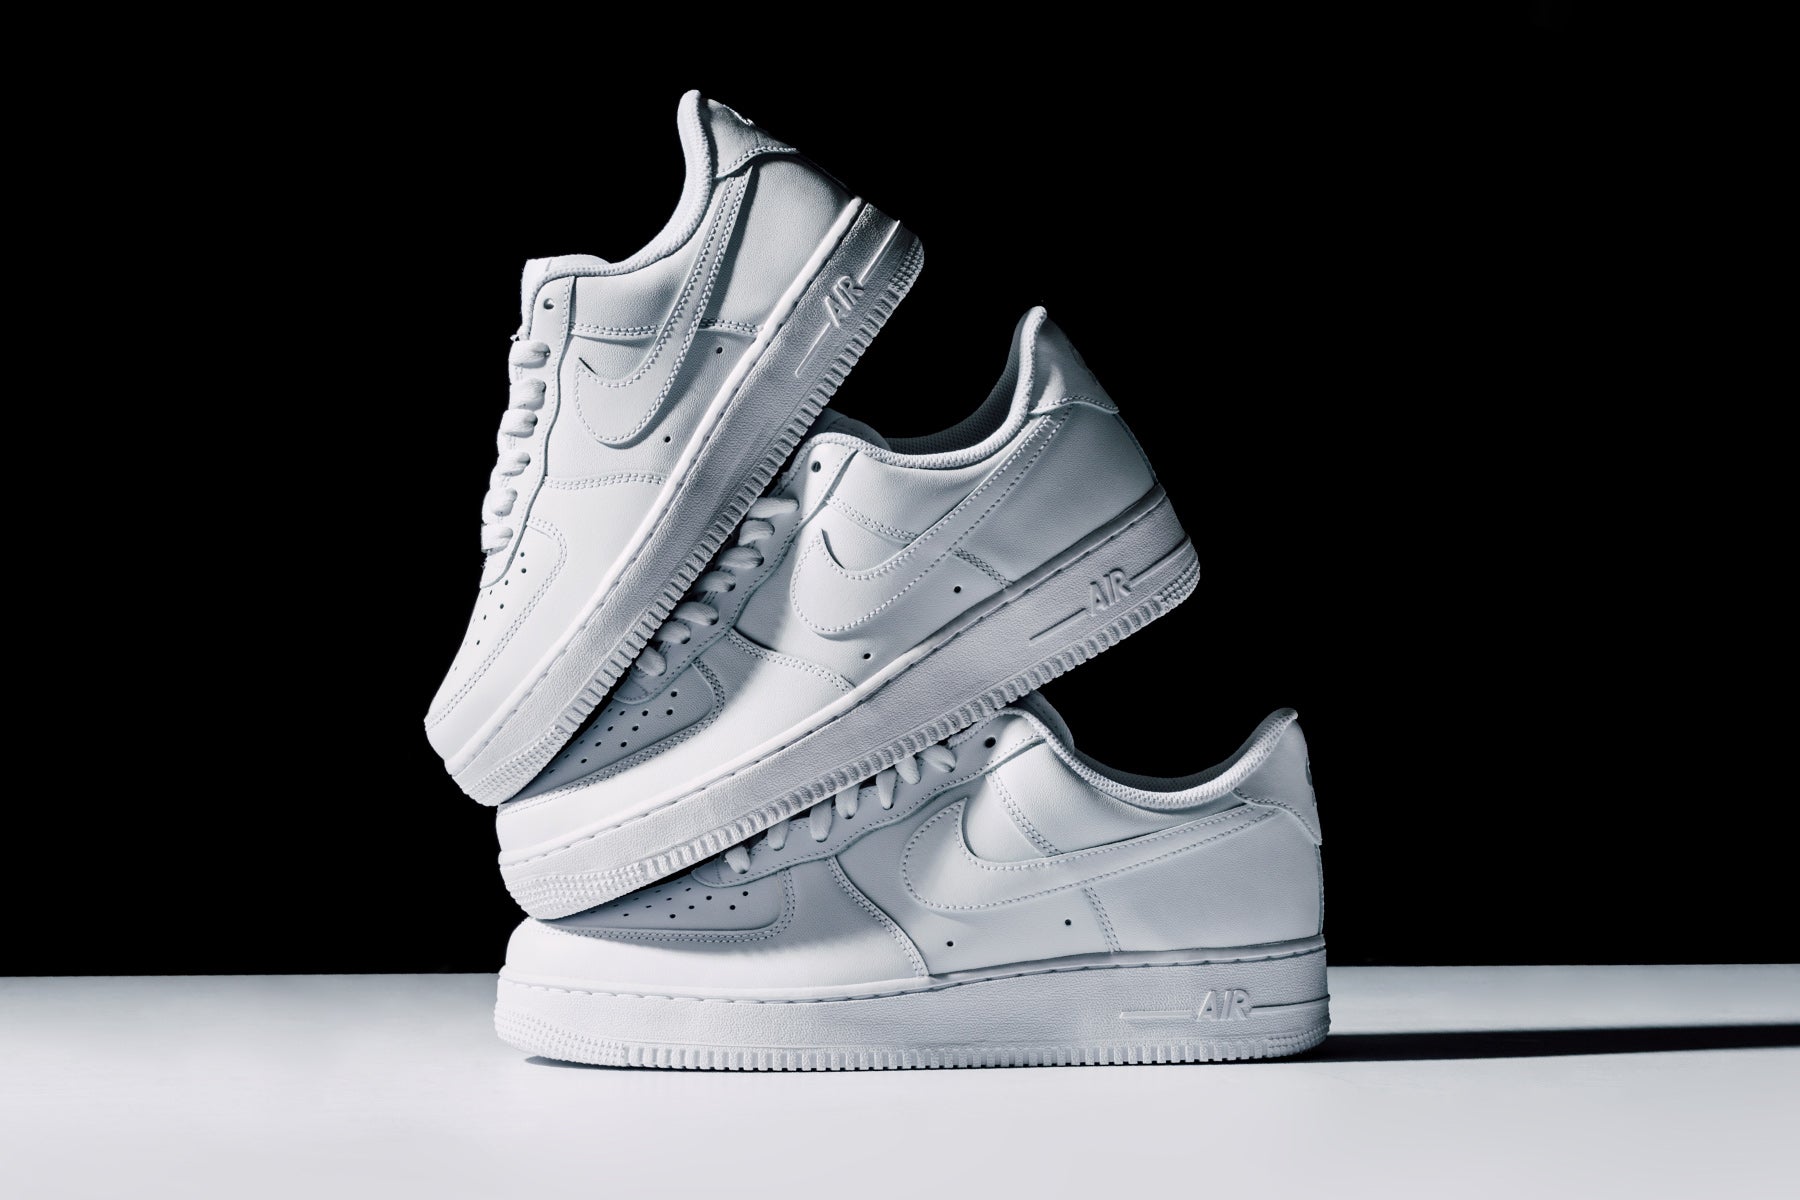 caliente Consejo crecimiento A Family Sneaker Classic: Nike Air Force 1 'Triple White' – Feature